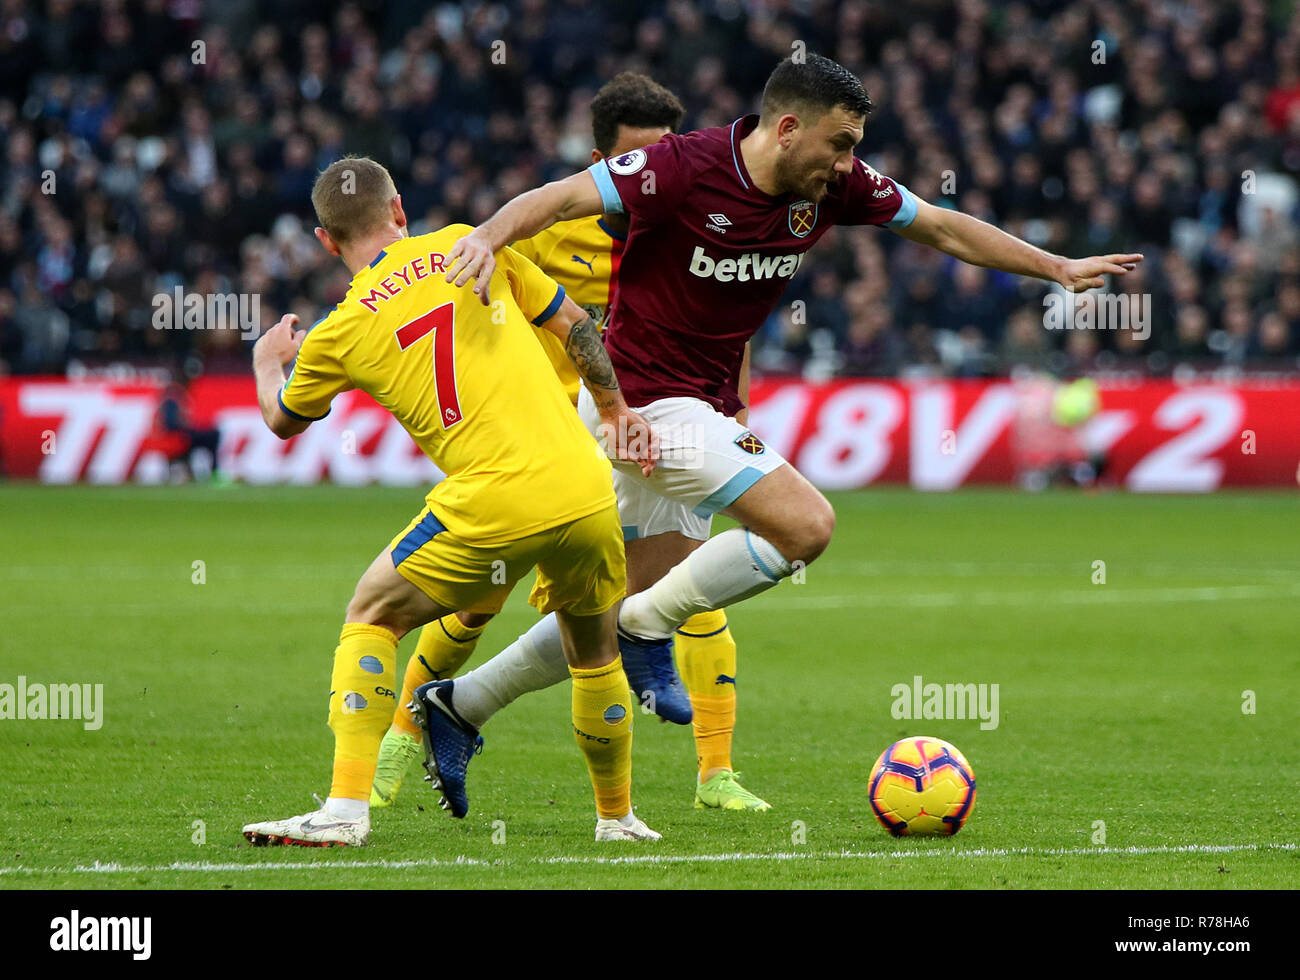 Crystal Palace's Max Meyer (left) and West Ham United's Robert Snodgrass (right) battle for the ball during the Premier League match at The London Stadium, London. Stock Photo